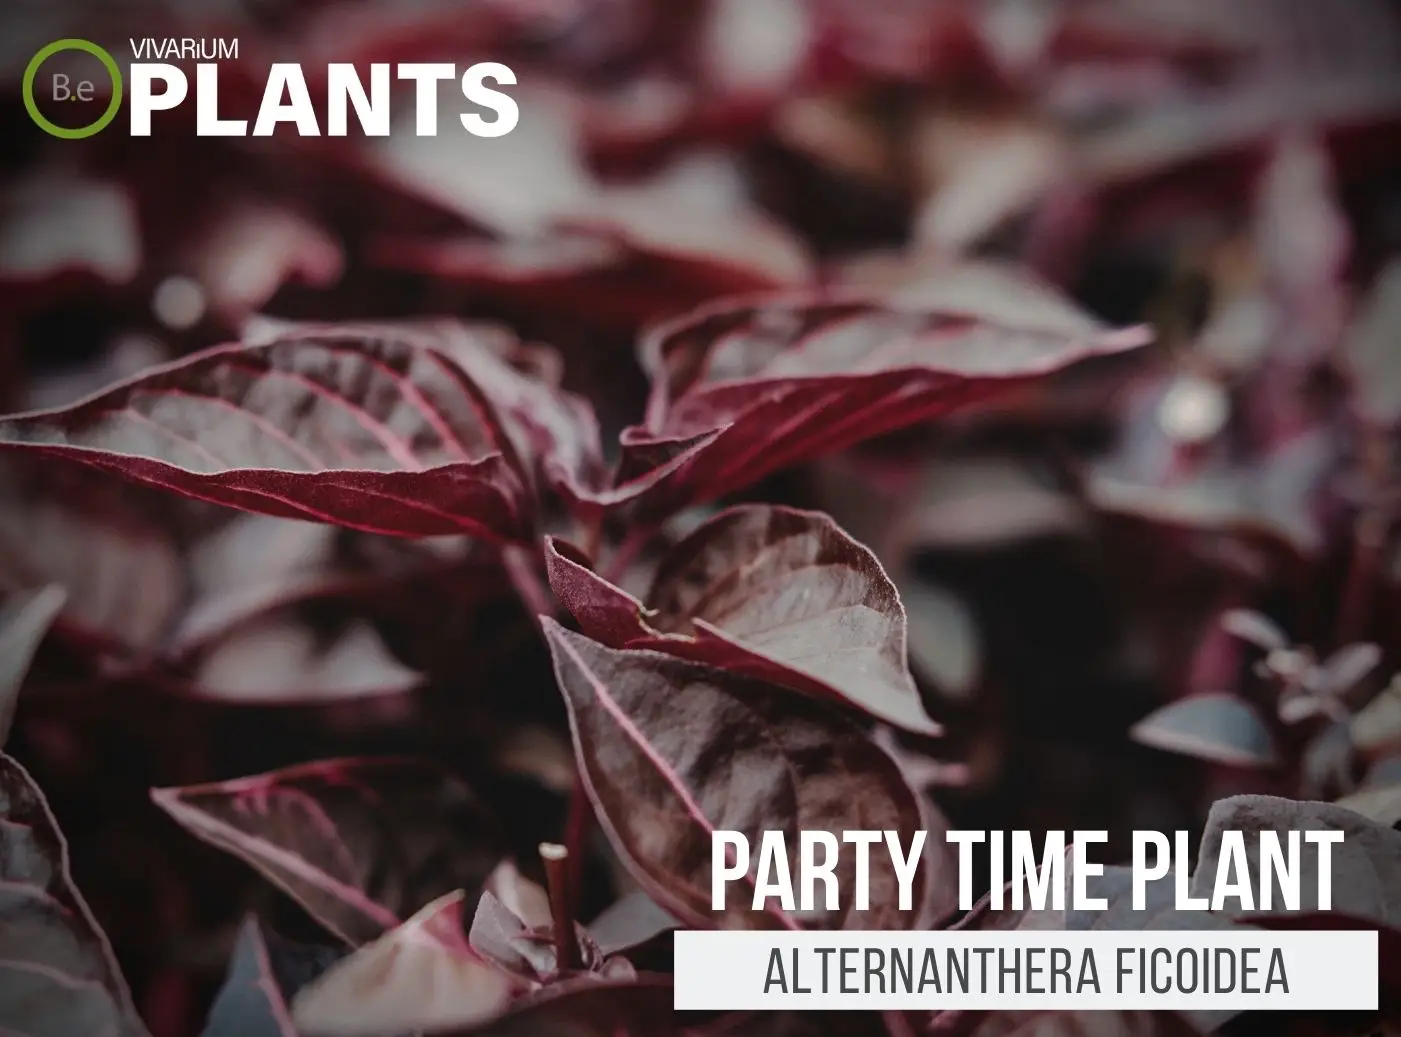 Alternanthera ficoidea "Party Time Plant" | The Care Guide